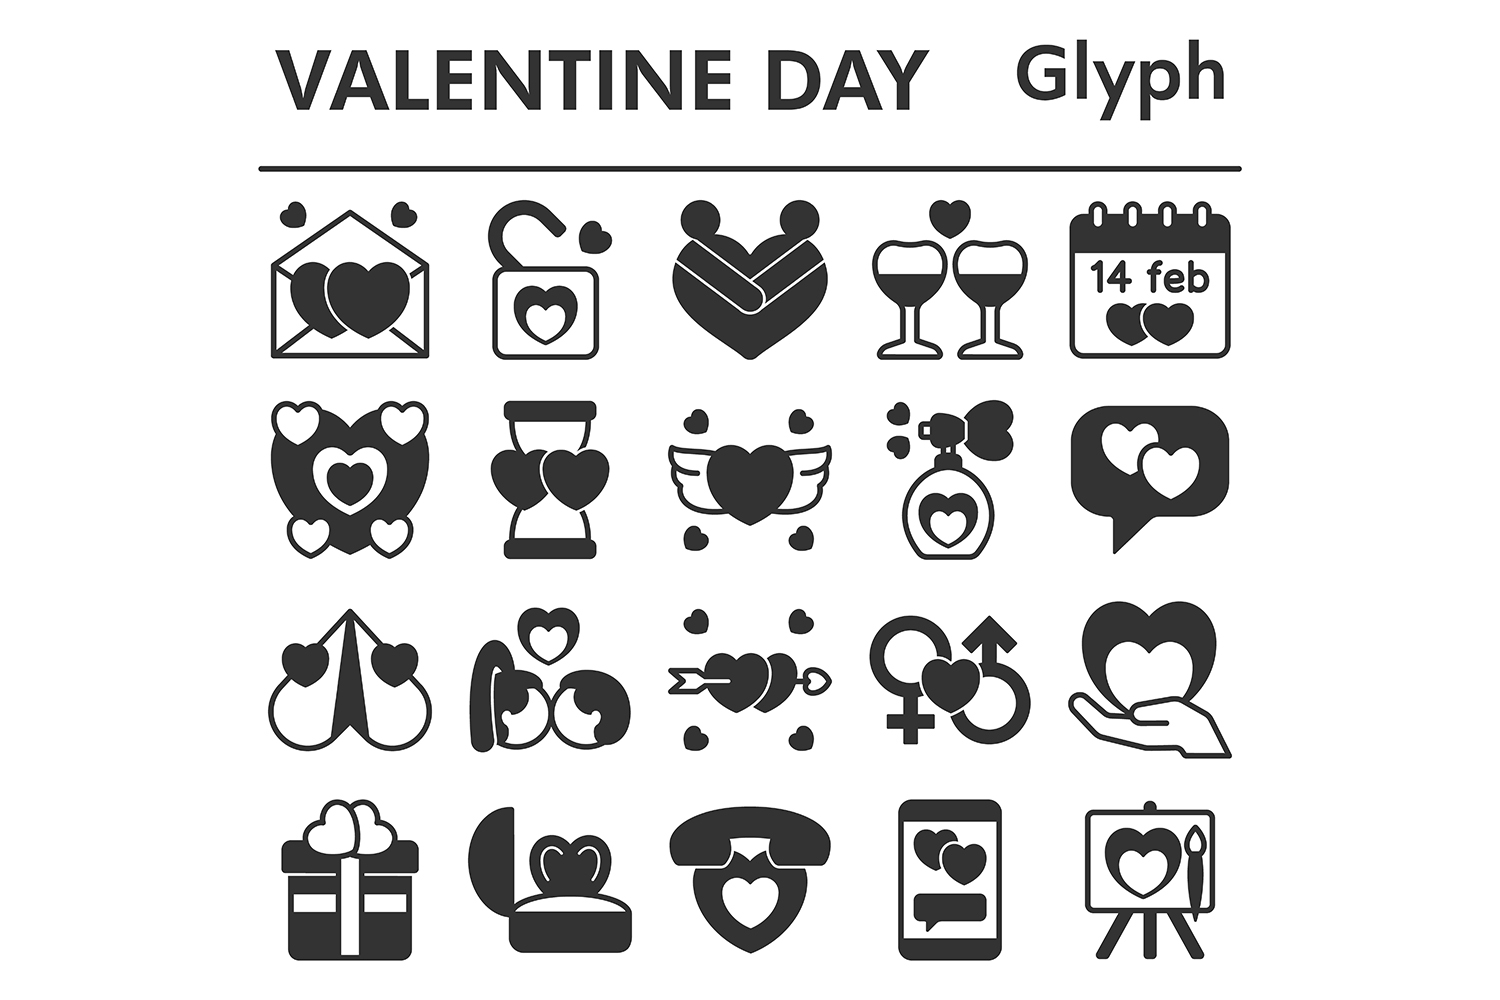 Valentines day icons set, glyph style pinterest preview image.